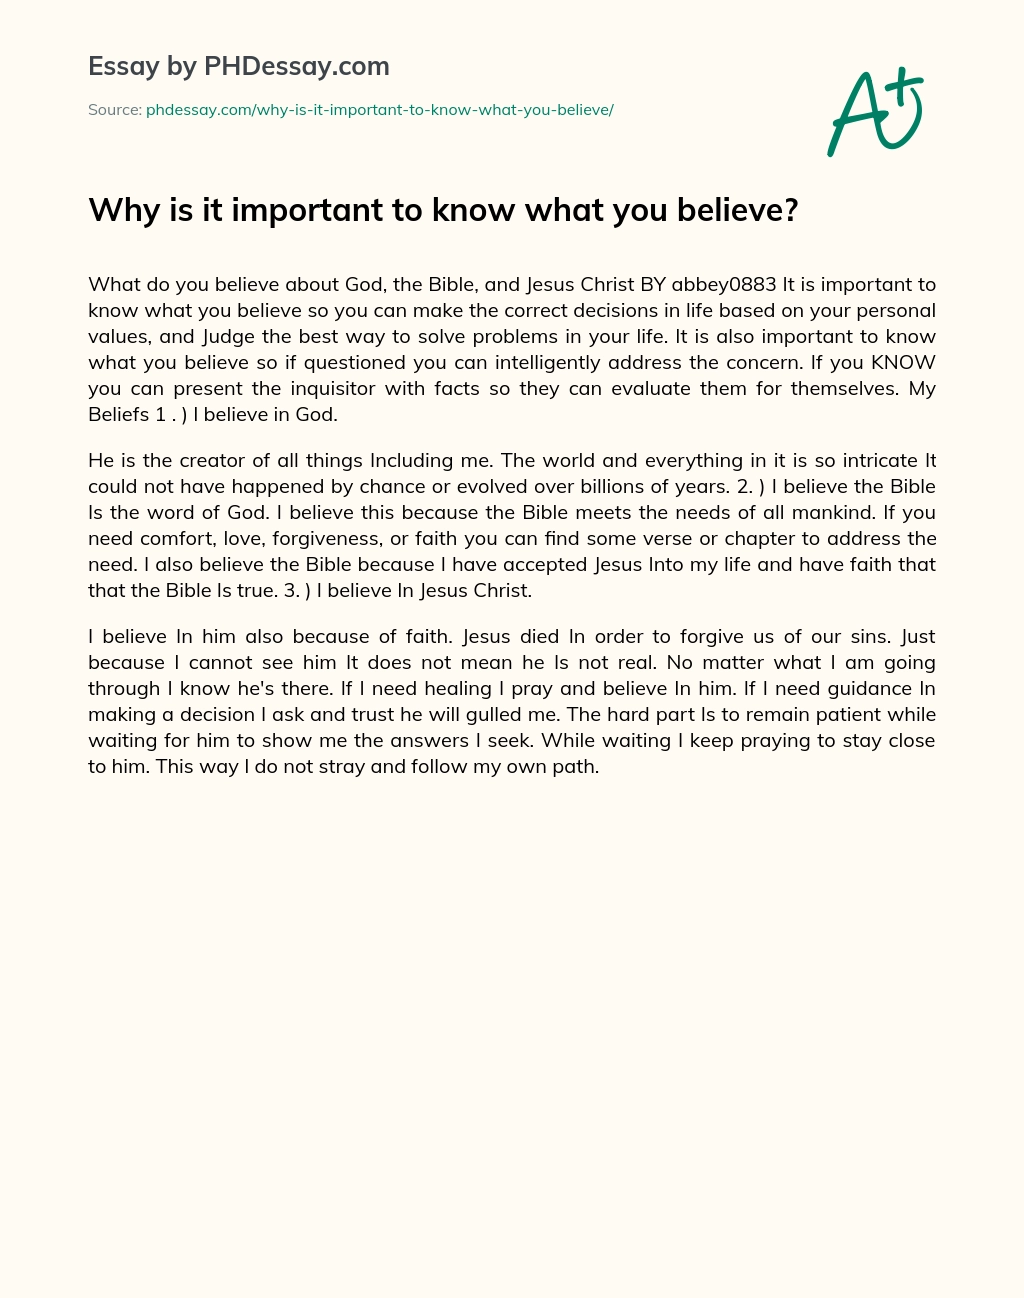 Why is it important to know what you believe? essay